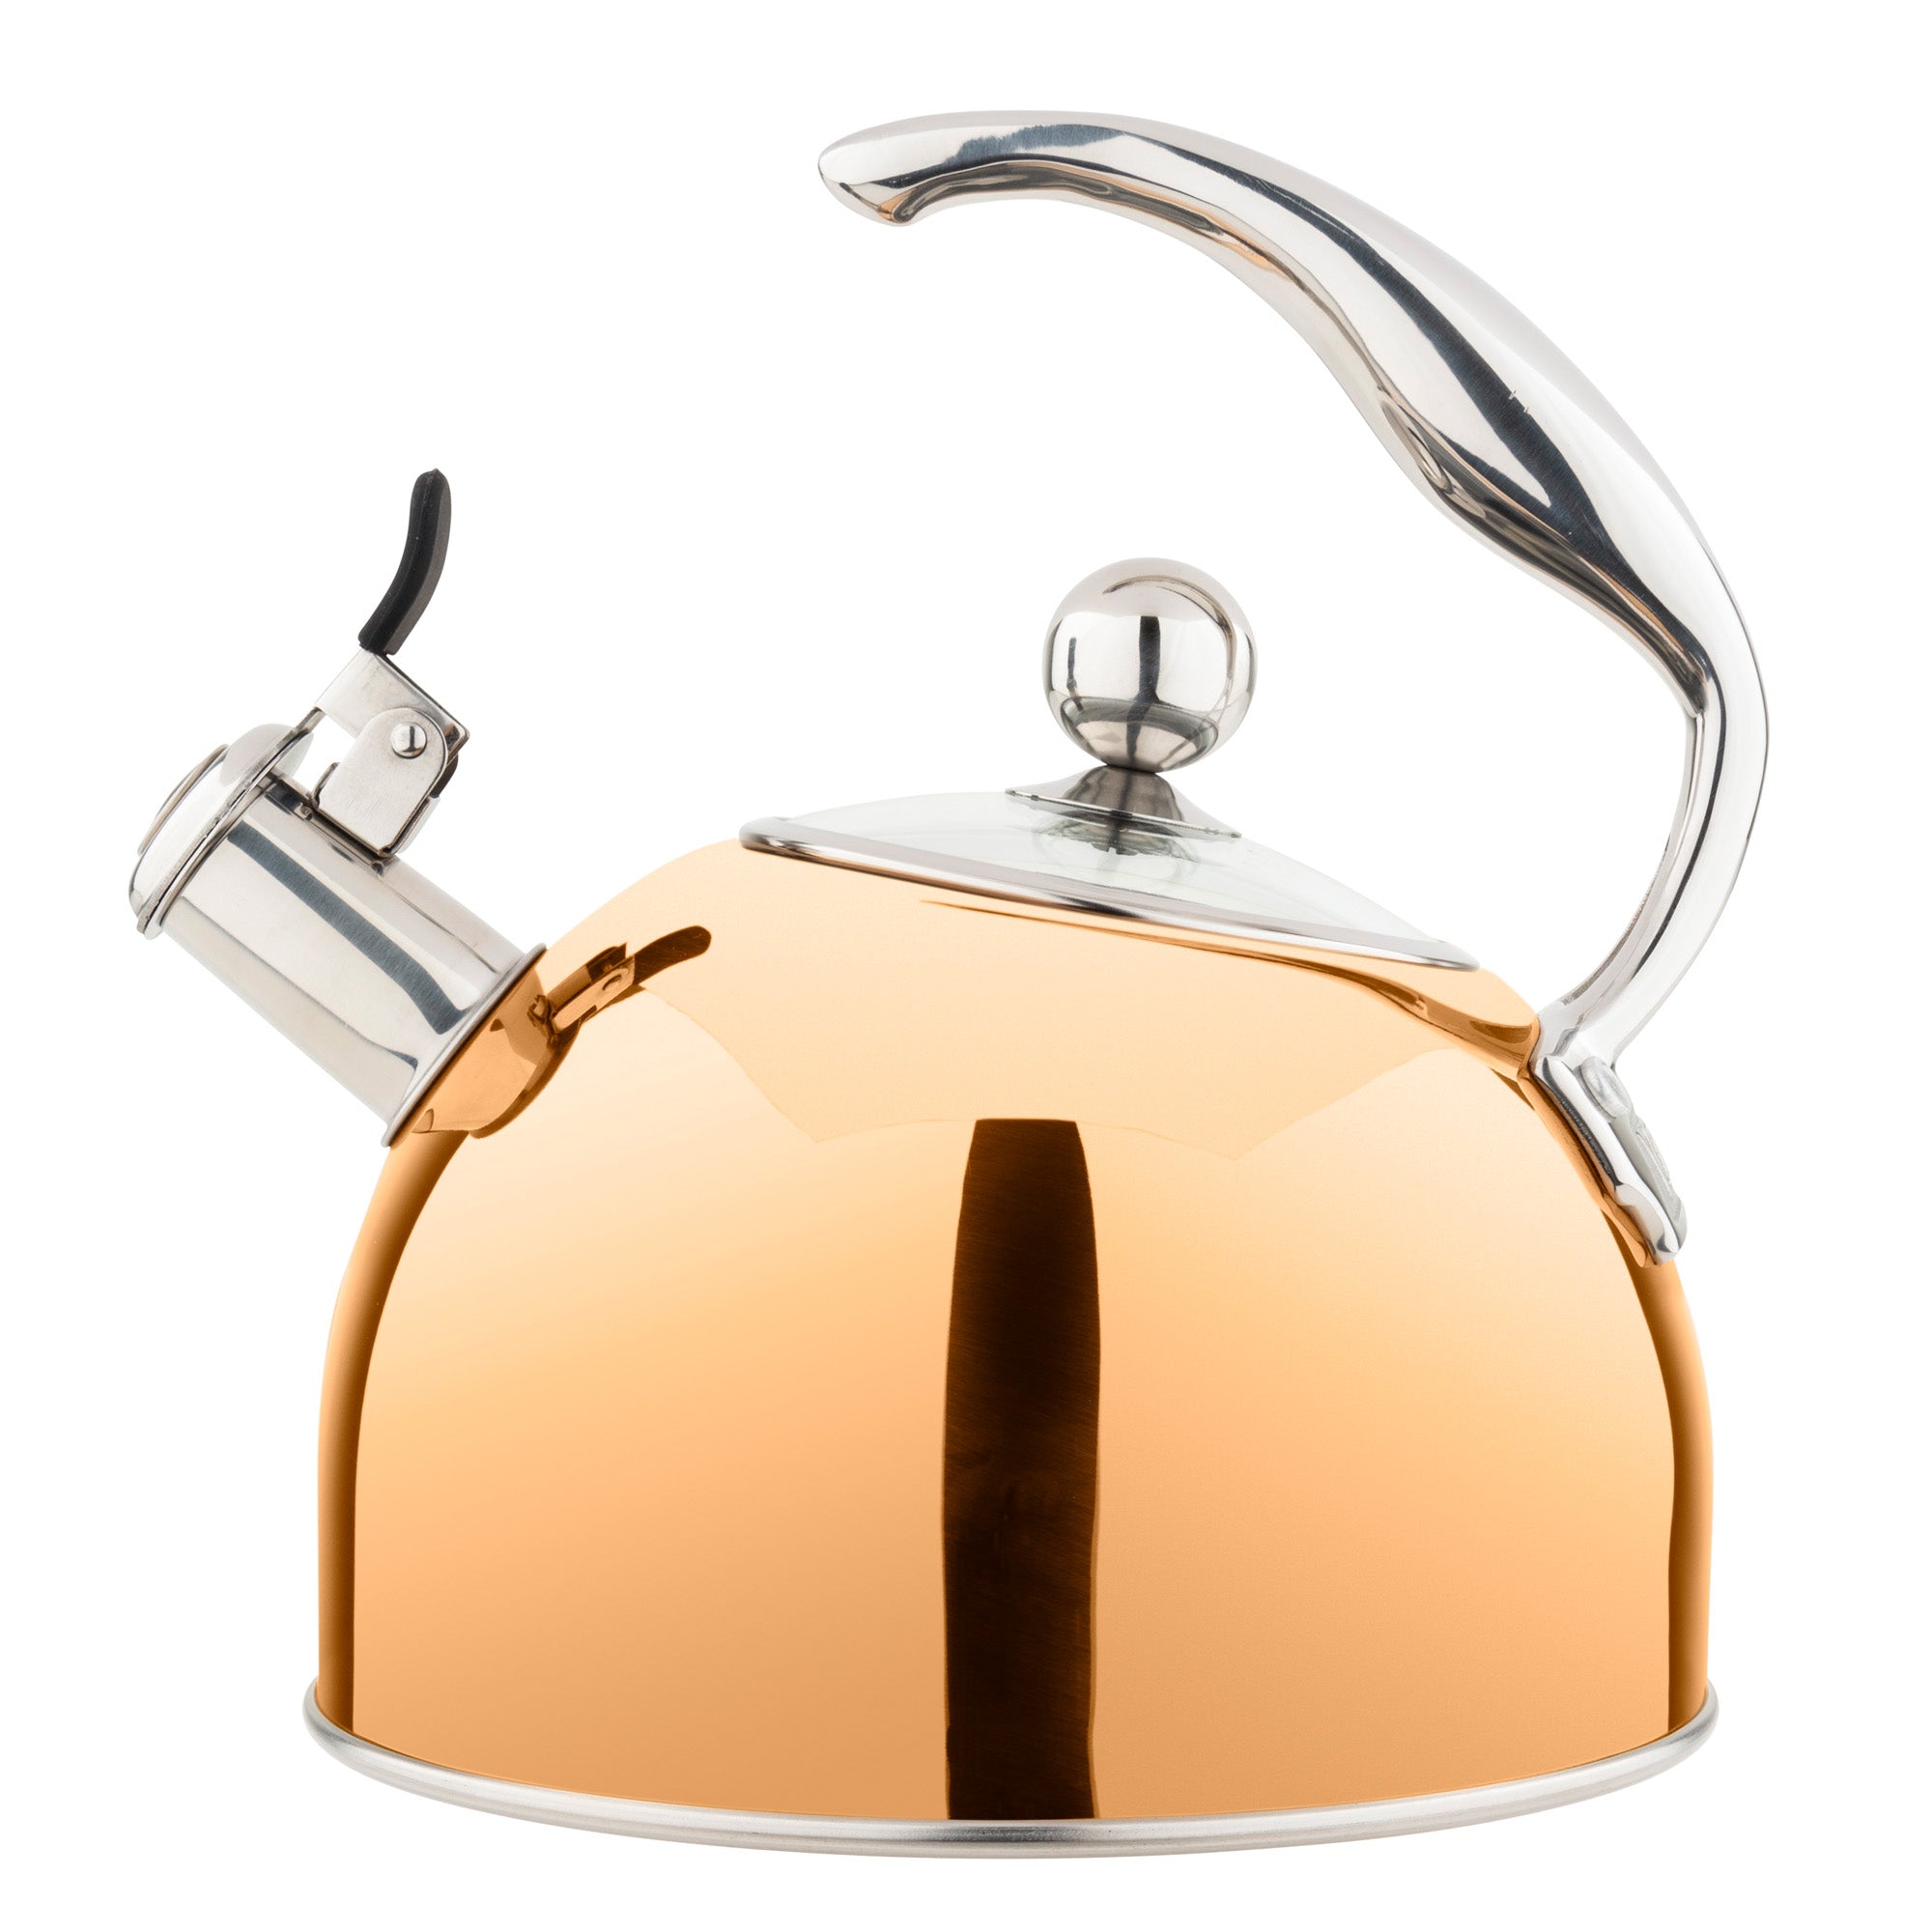 Tea Kettles Made in the USA